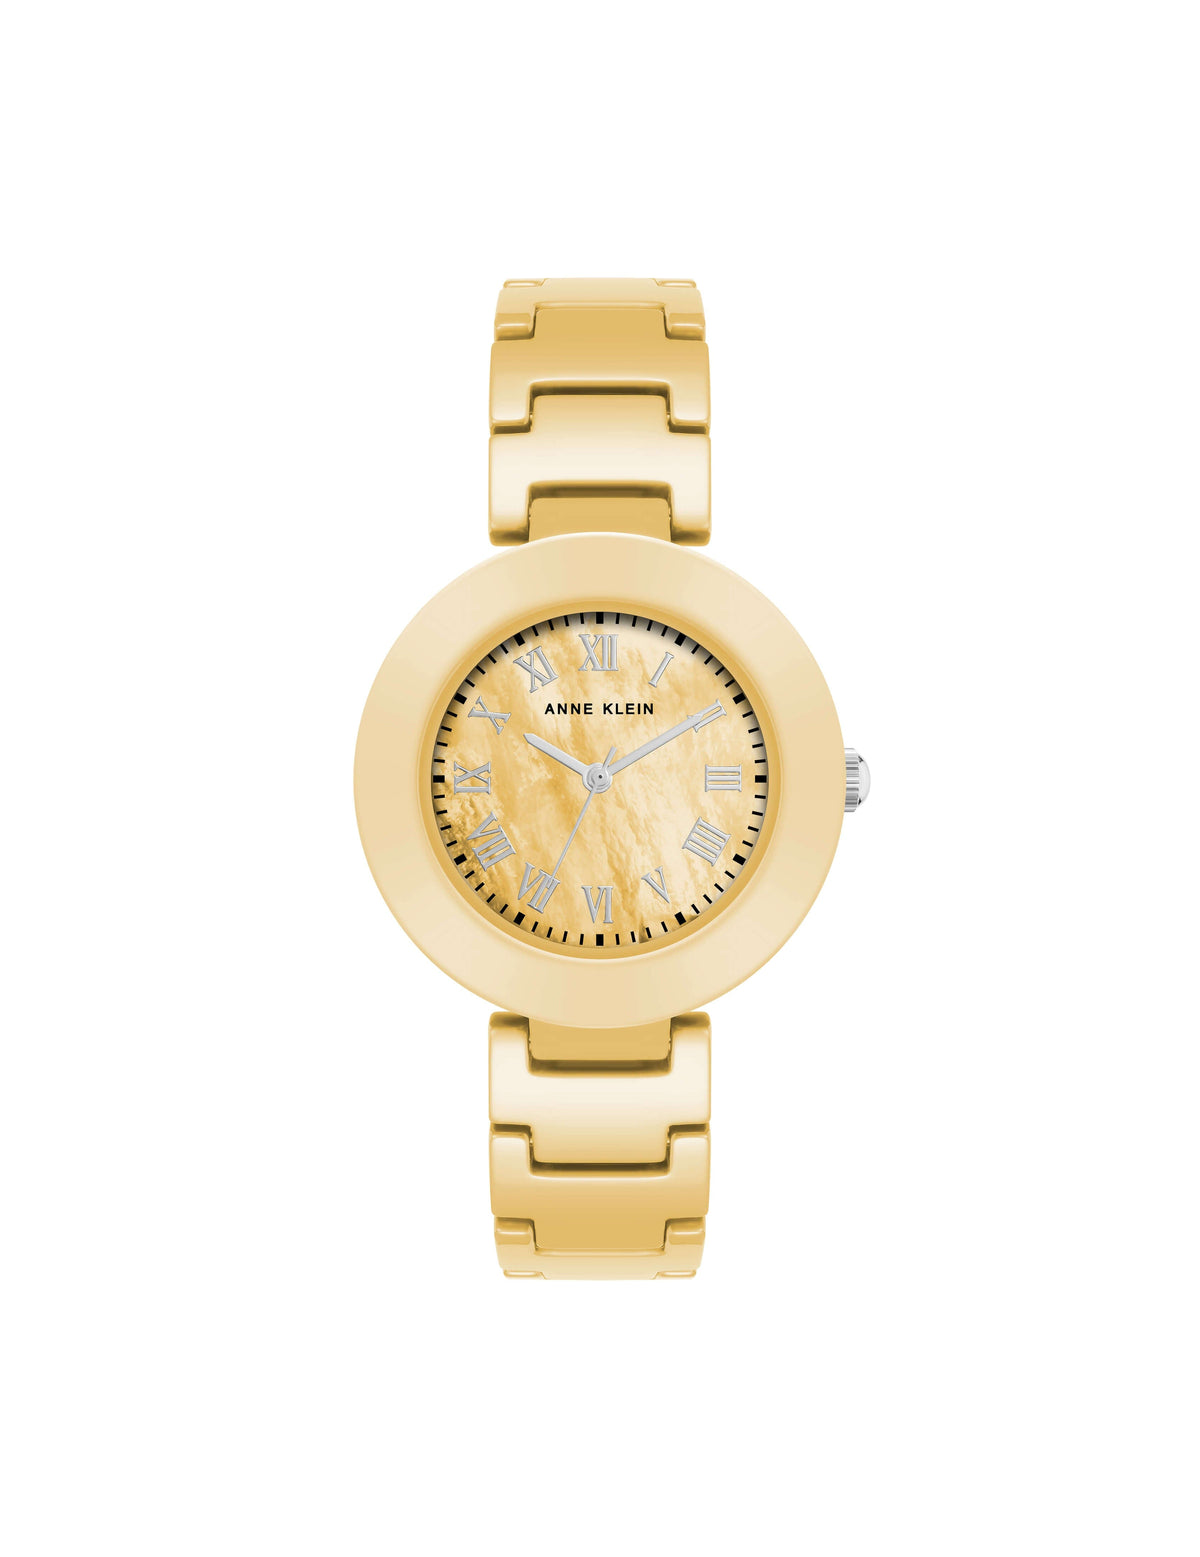 Anne Klein Yellow Round Mother of Pearl Dial Ceramic Bracelet Watch